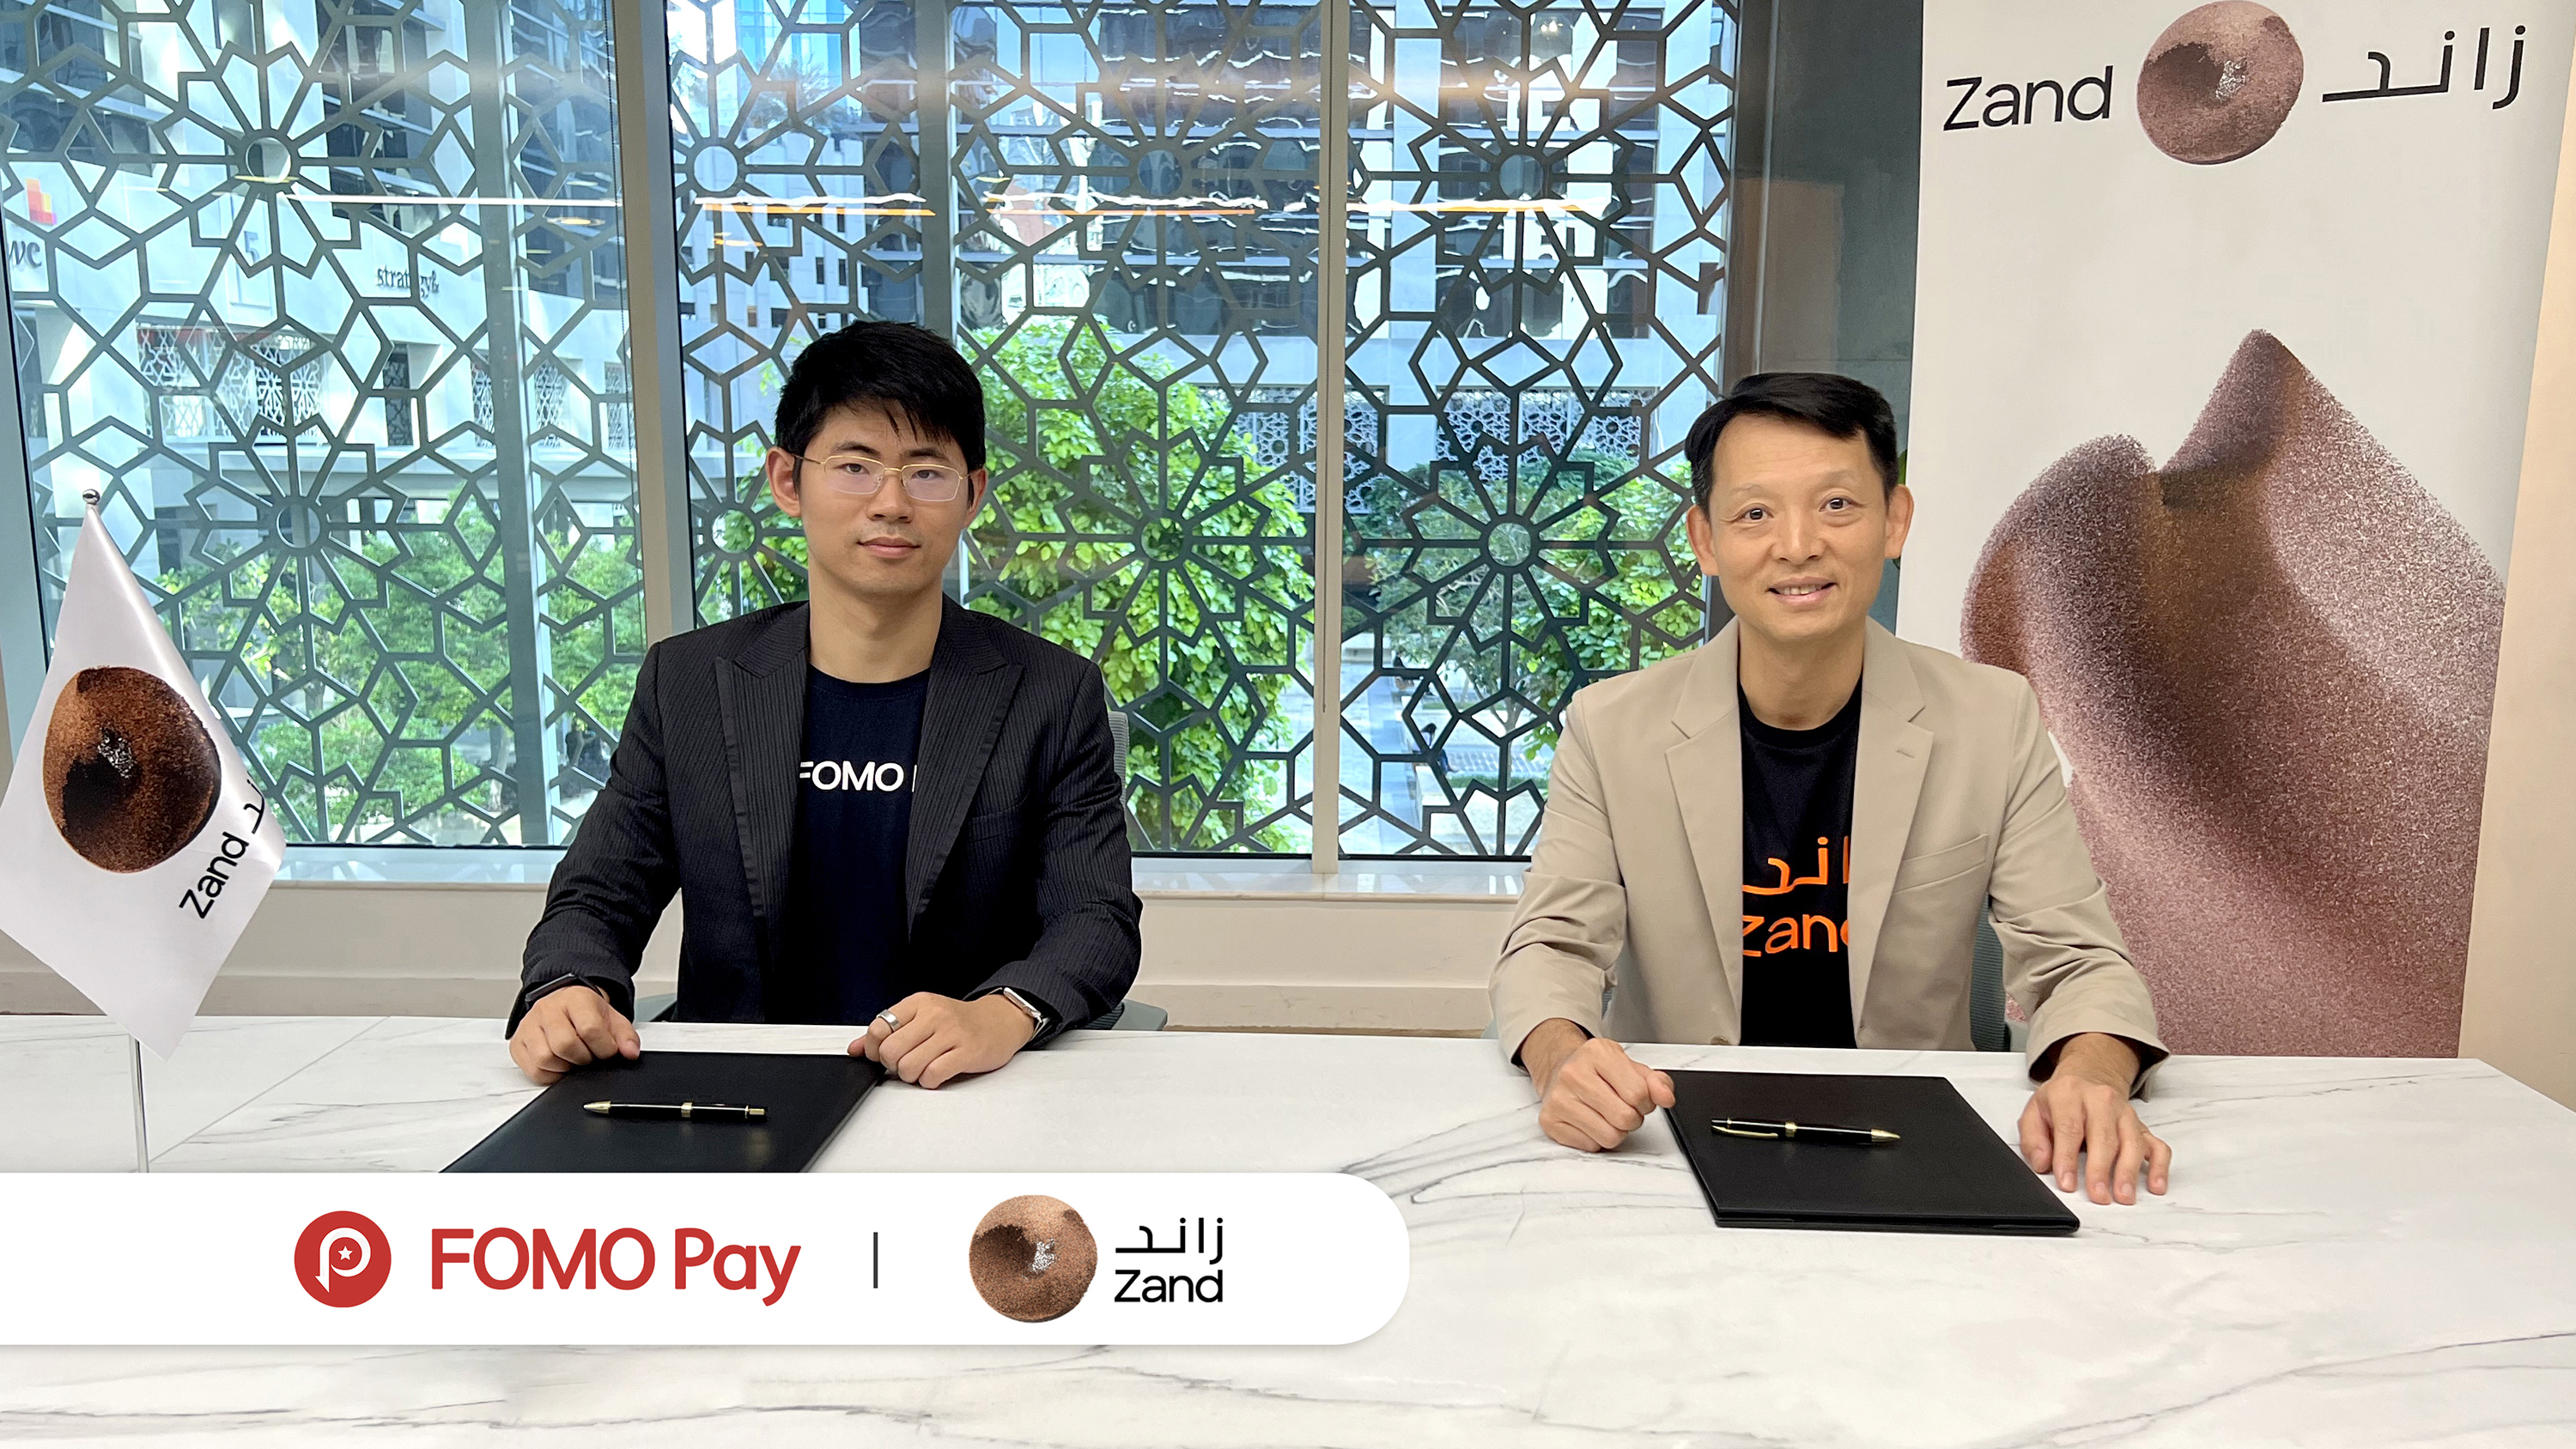 Zack Yang (left), Co-Founder of FOMO Pay, and Michael Chan (right), CEO of Zand